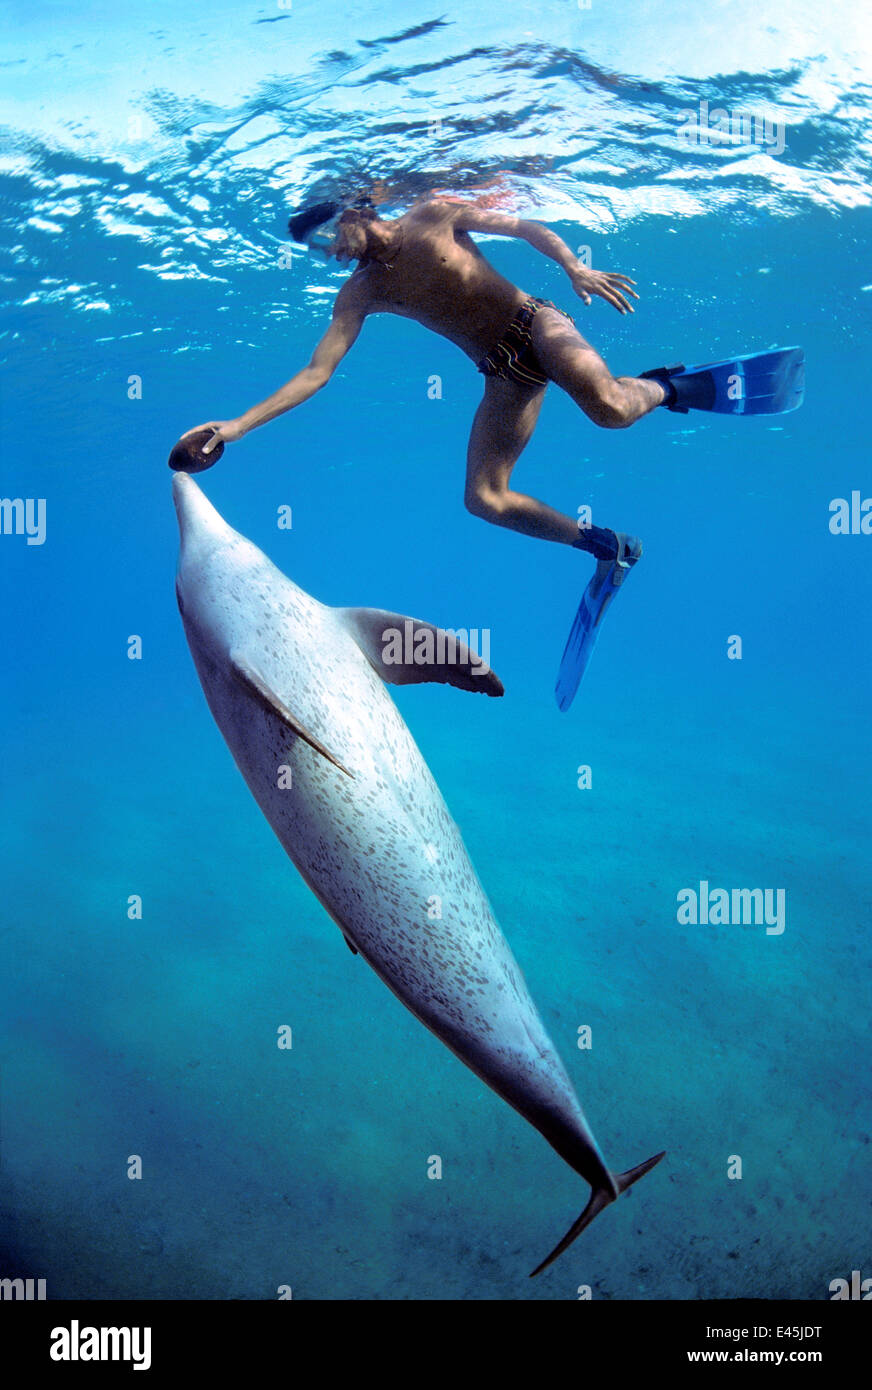 Snorkeler holding Sea Cucumber (Holothuria edulis) swimming with wild Bottlenose Dolphin (Tursiops truncatus), Nuweiba, Egypt - Red Sea. Model released Stock Photo